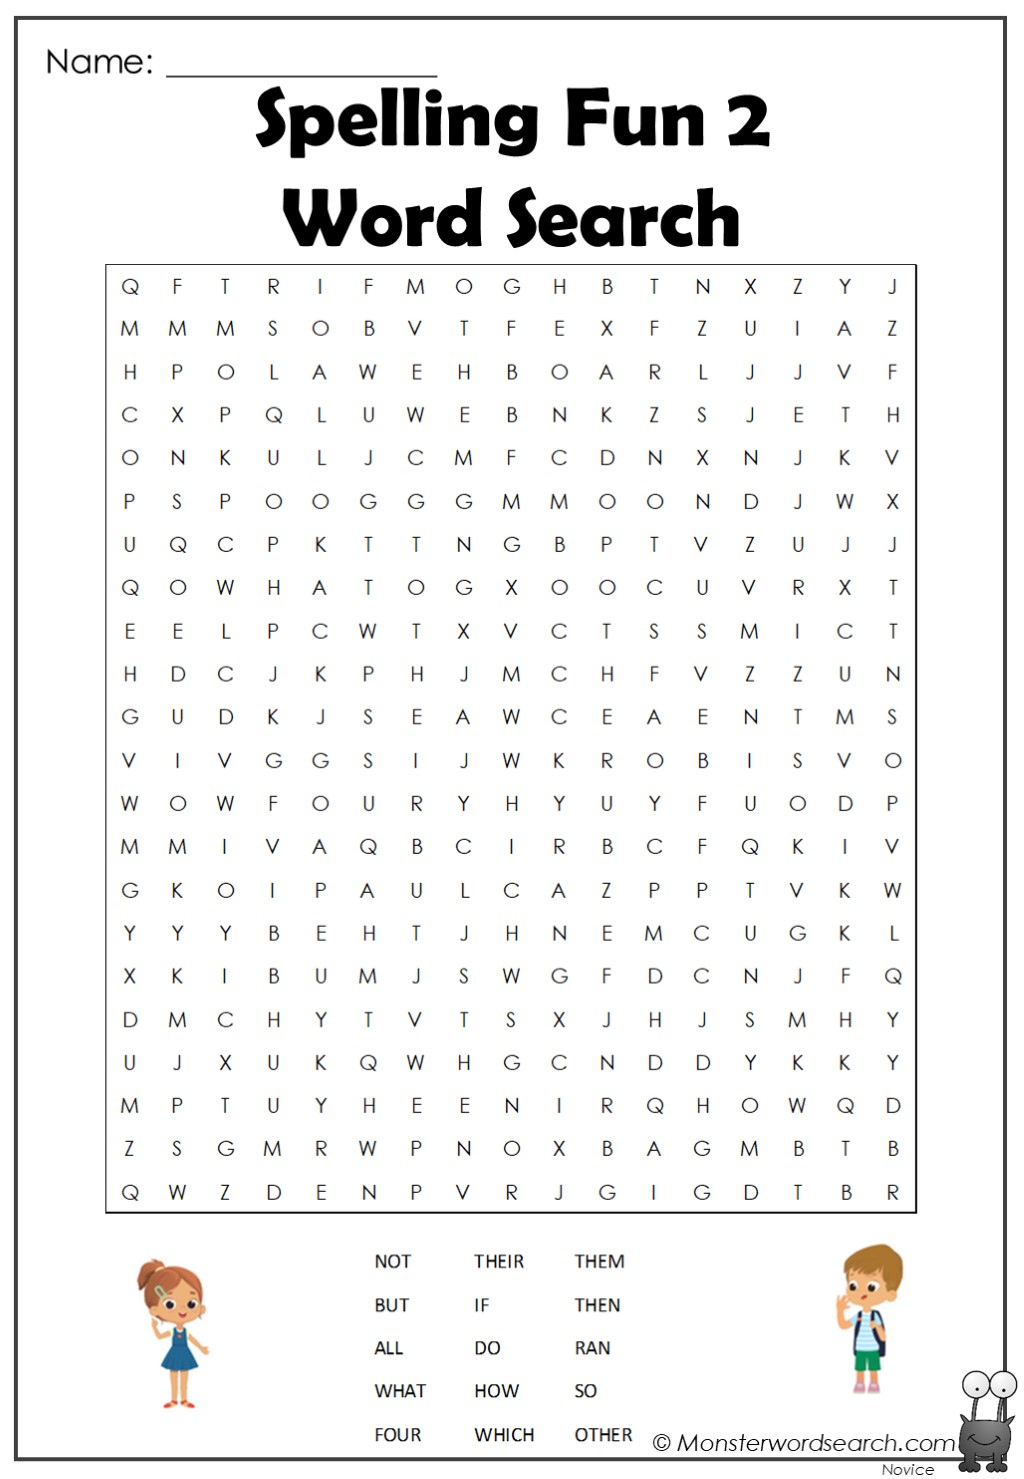 Spelling Fun 2 Word Search - Monster Word Search with regard to 2Nd Grade Word Search Free Printable